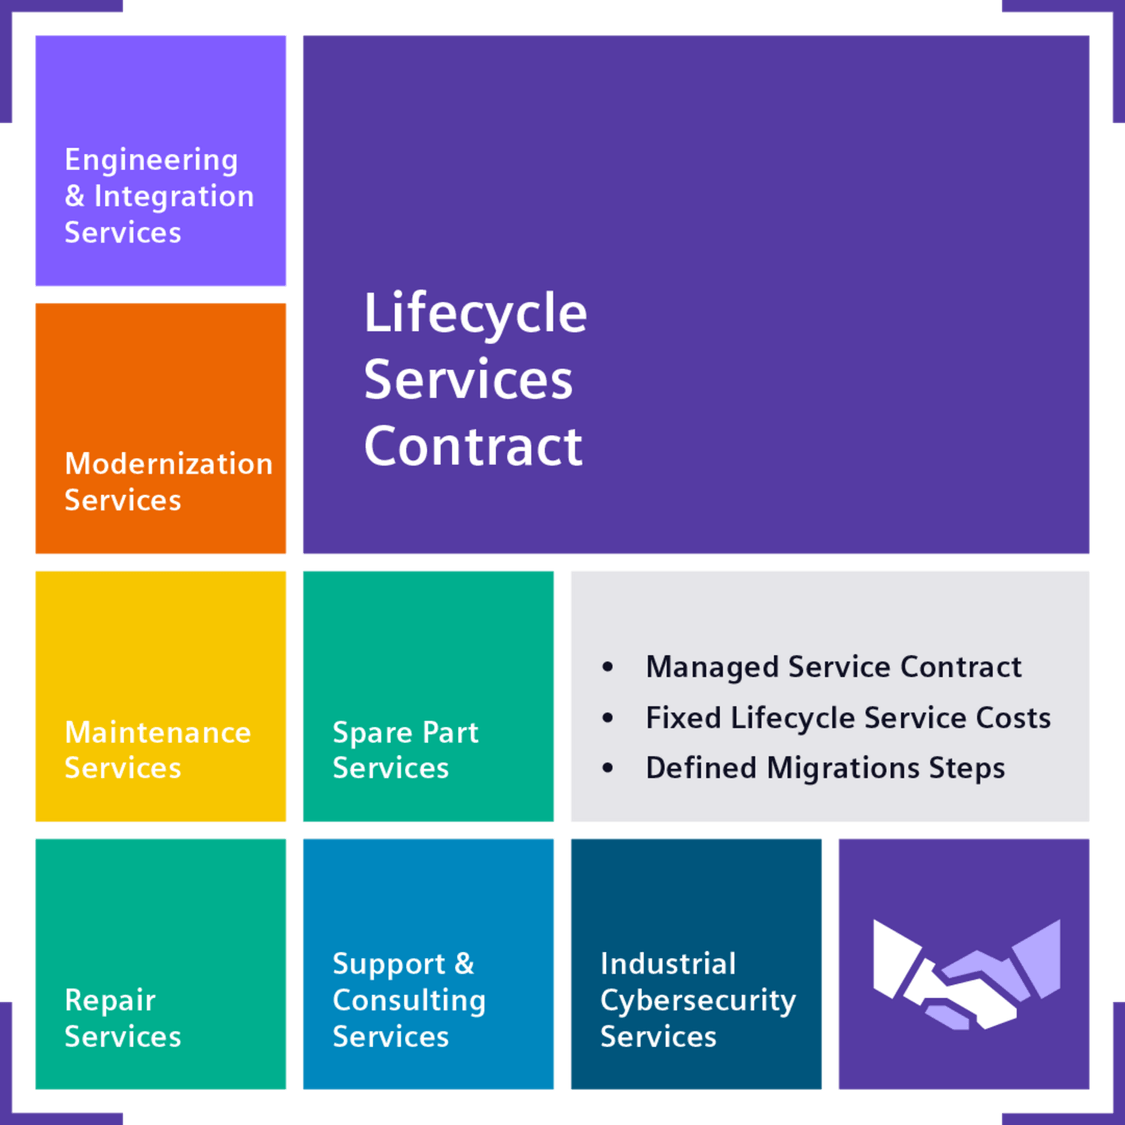 Lifecycle Services Contract